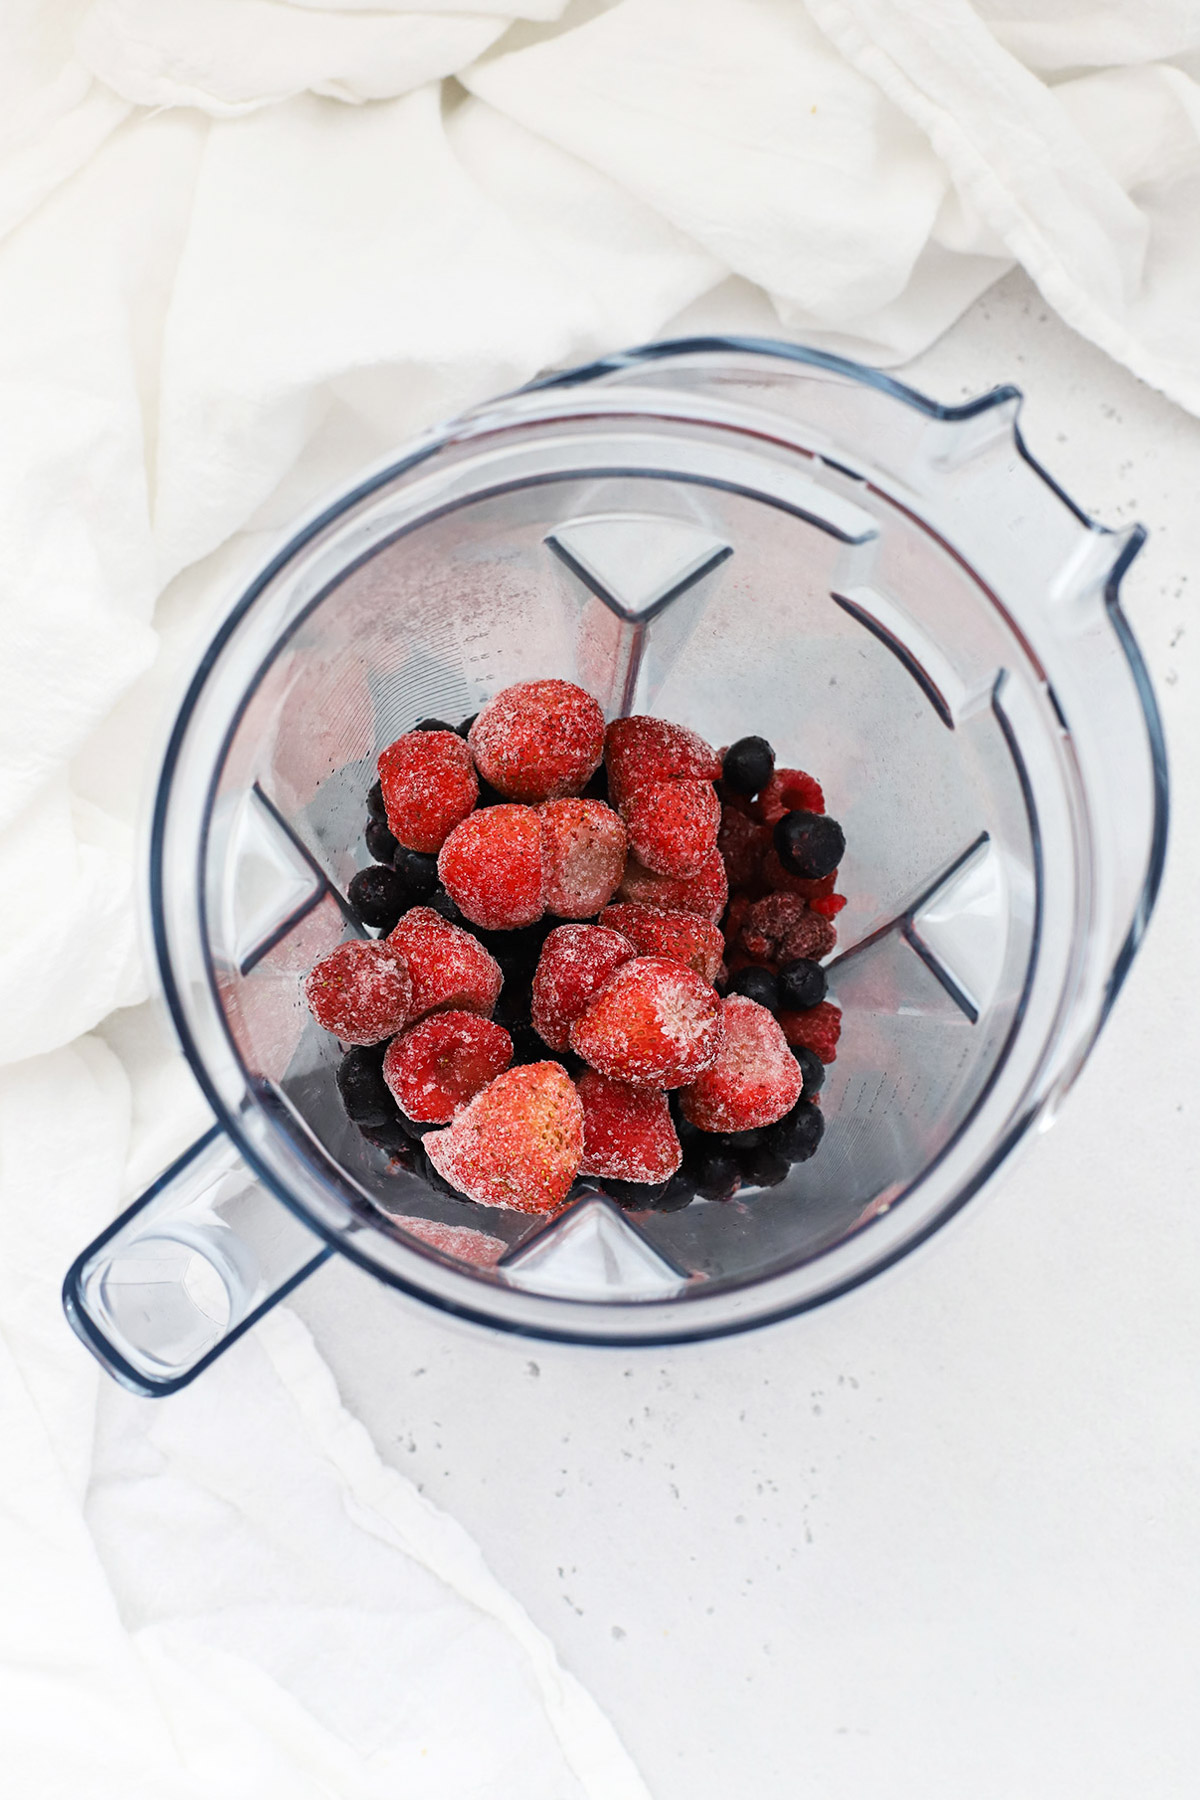 Adding frozen berries to a blender to make berry smoothies